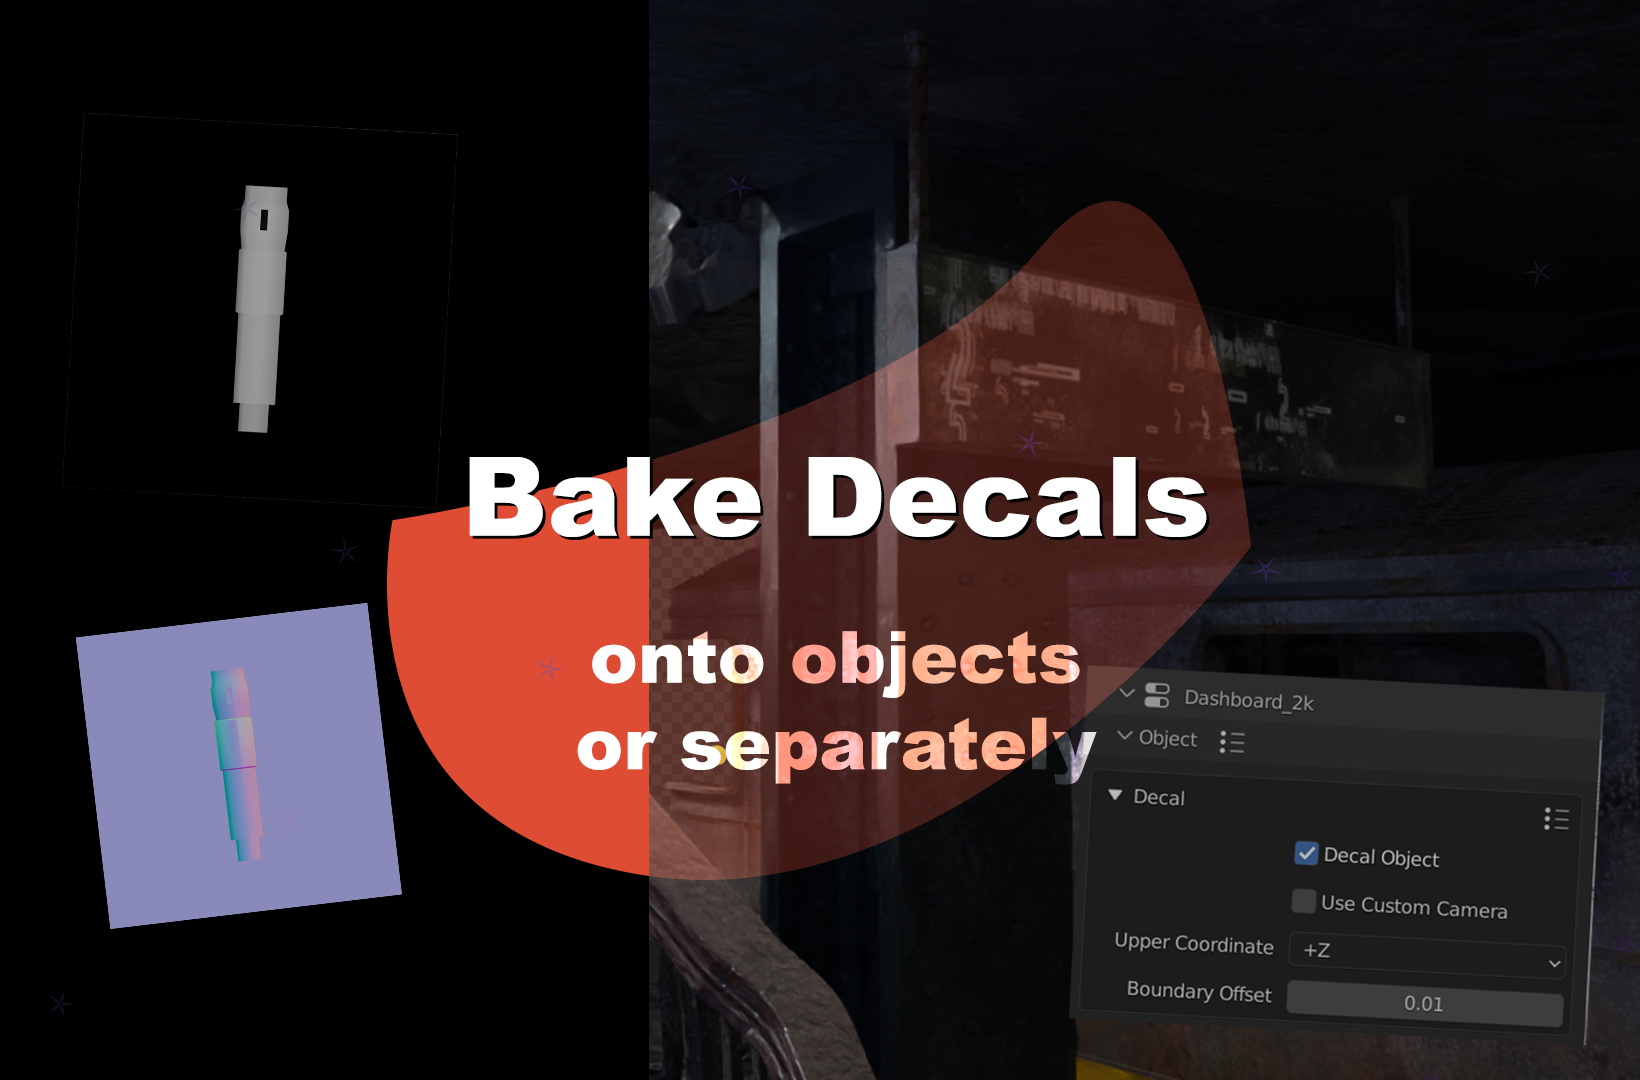 Bake Decals separately and onto objects